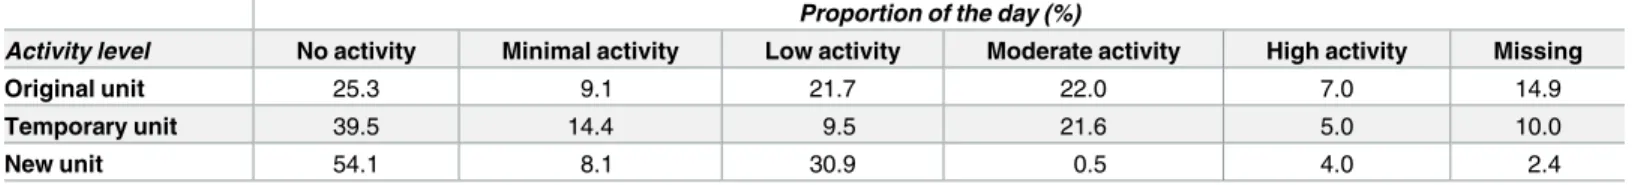 Table 6. Patients’ activities as a proportion (%) of the day spent in different activity categories